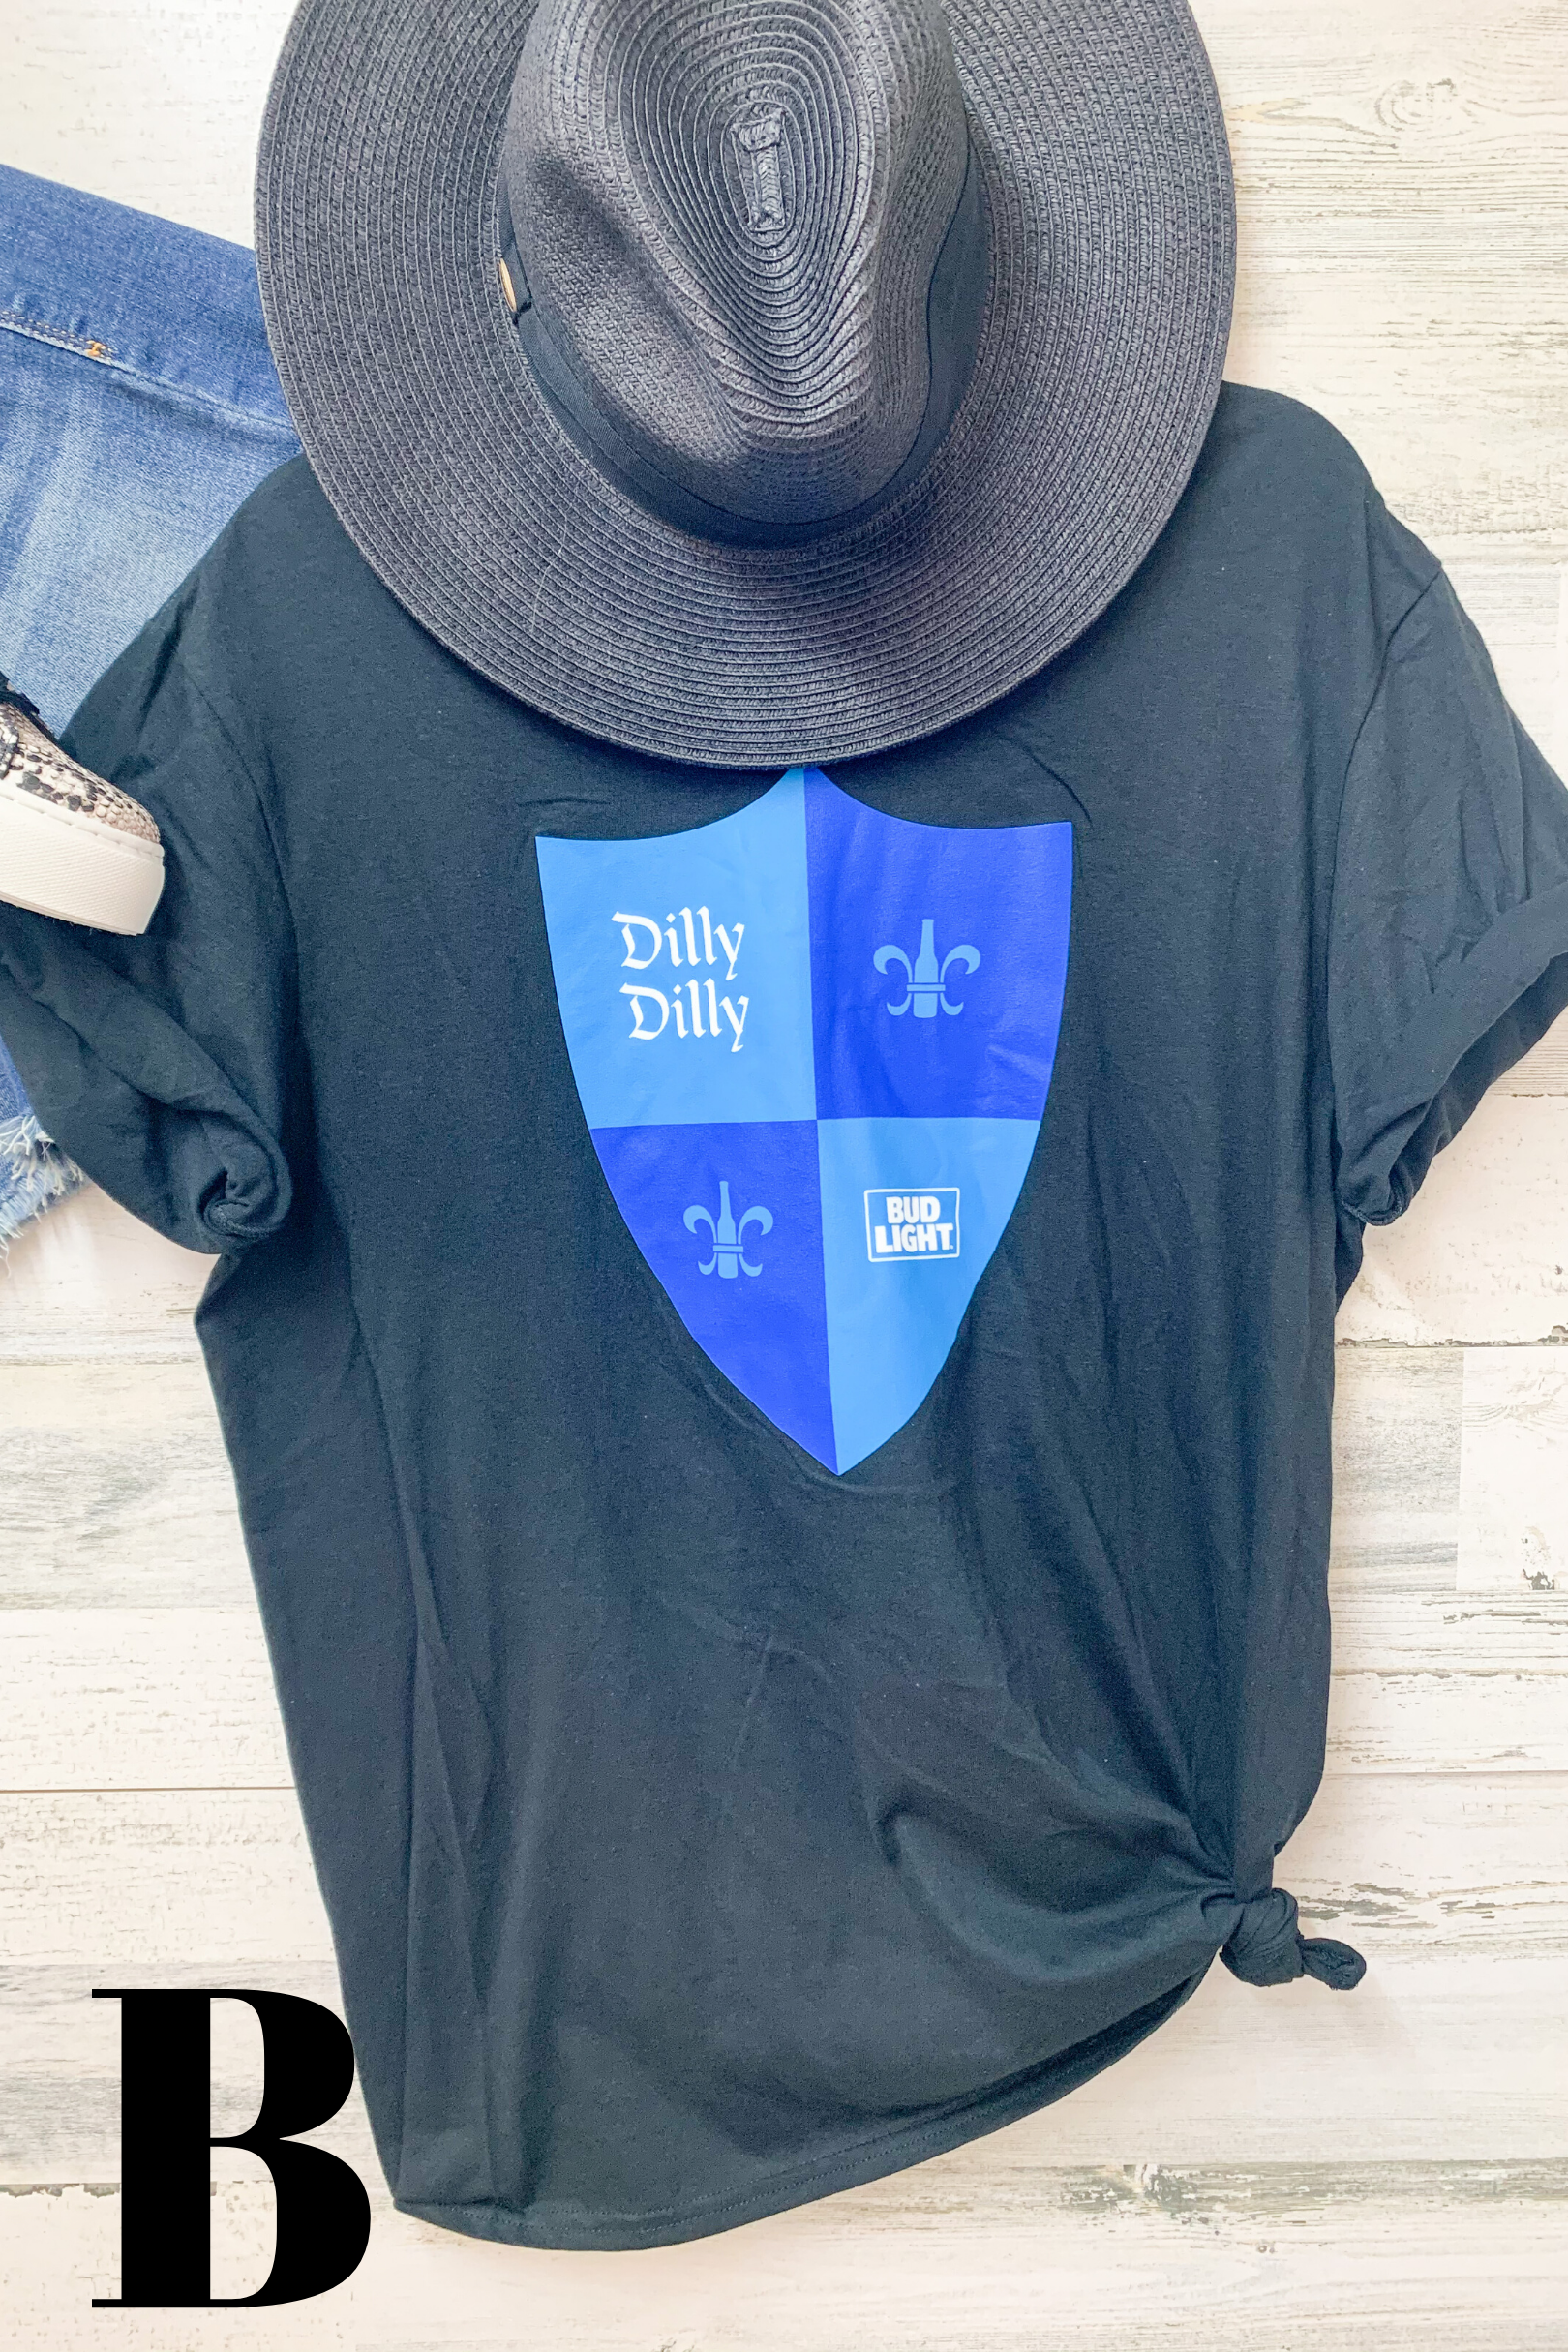 BUD LIGHT | Dilly Dilly Graphic Tees in Variety of Styles - Giddy Up Glamour Boutique